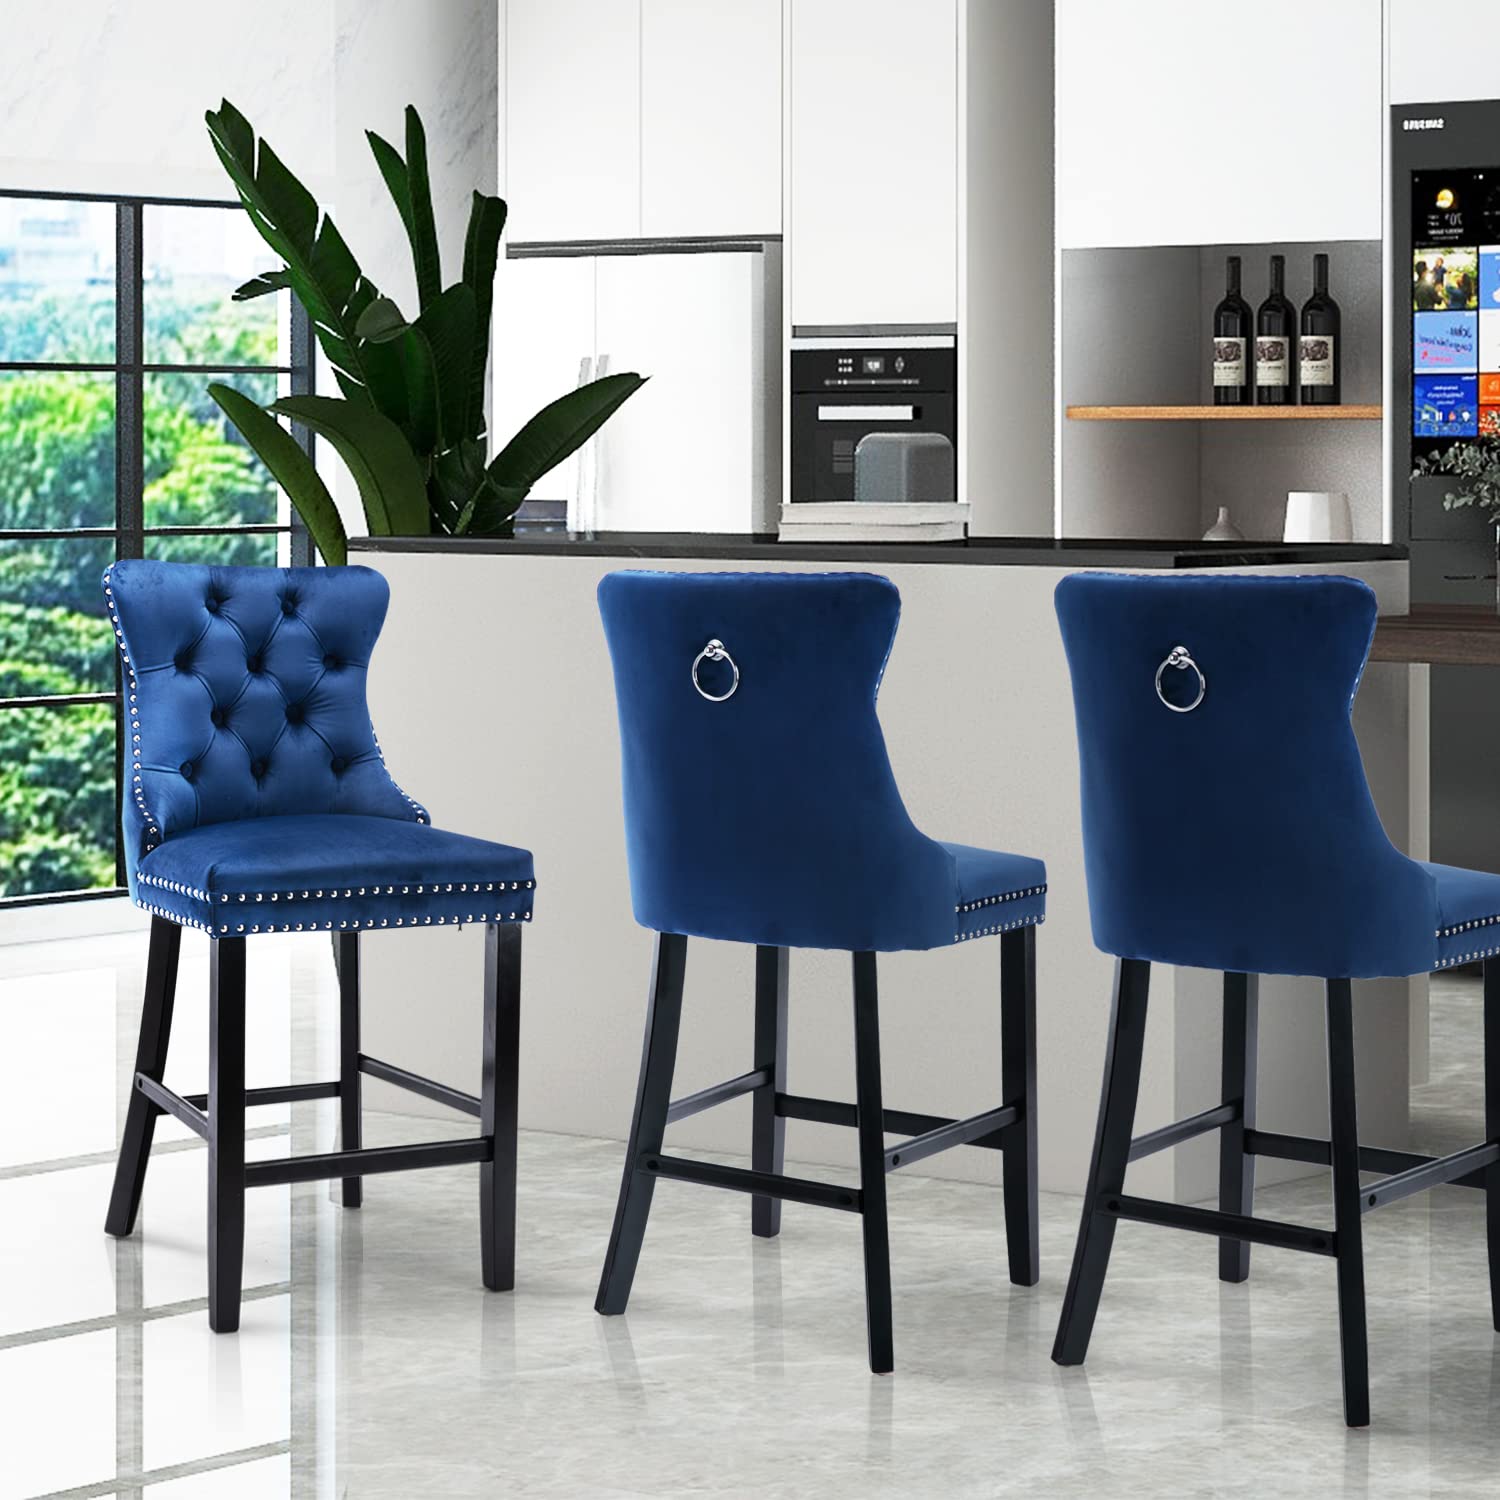 2X Velvet Bar Stools with Studs Trim Wooden Legs Tufted Dining Chairs Kitchen - image12